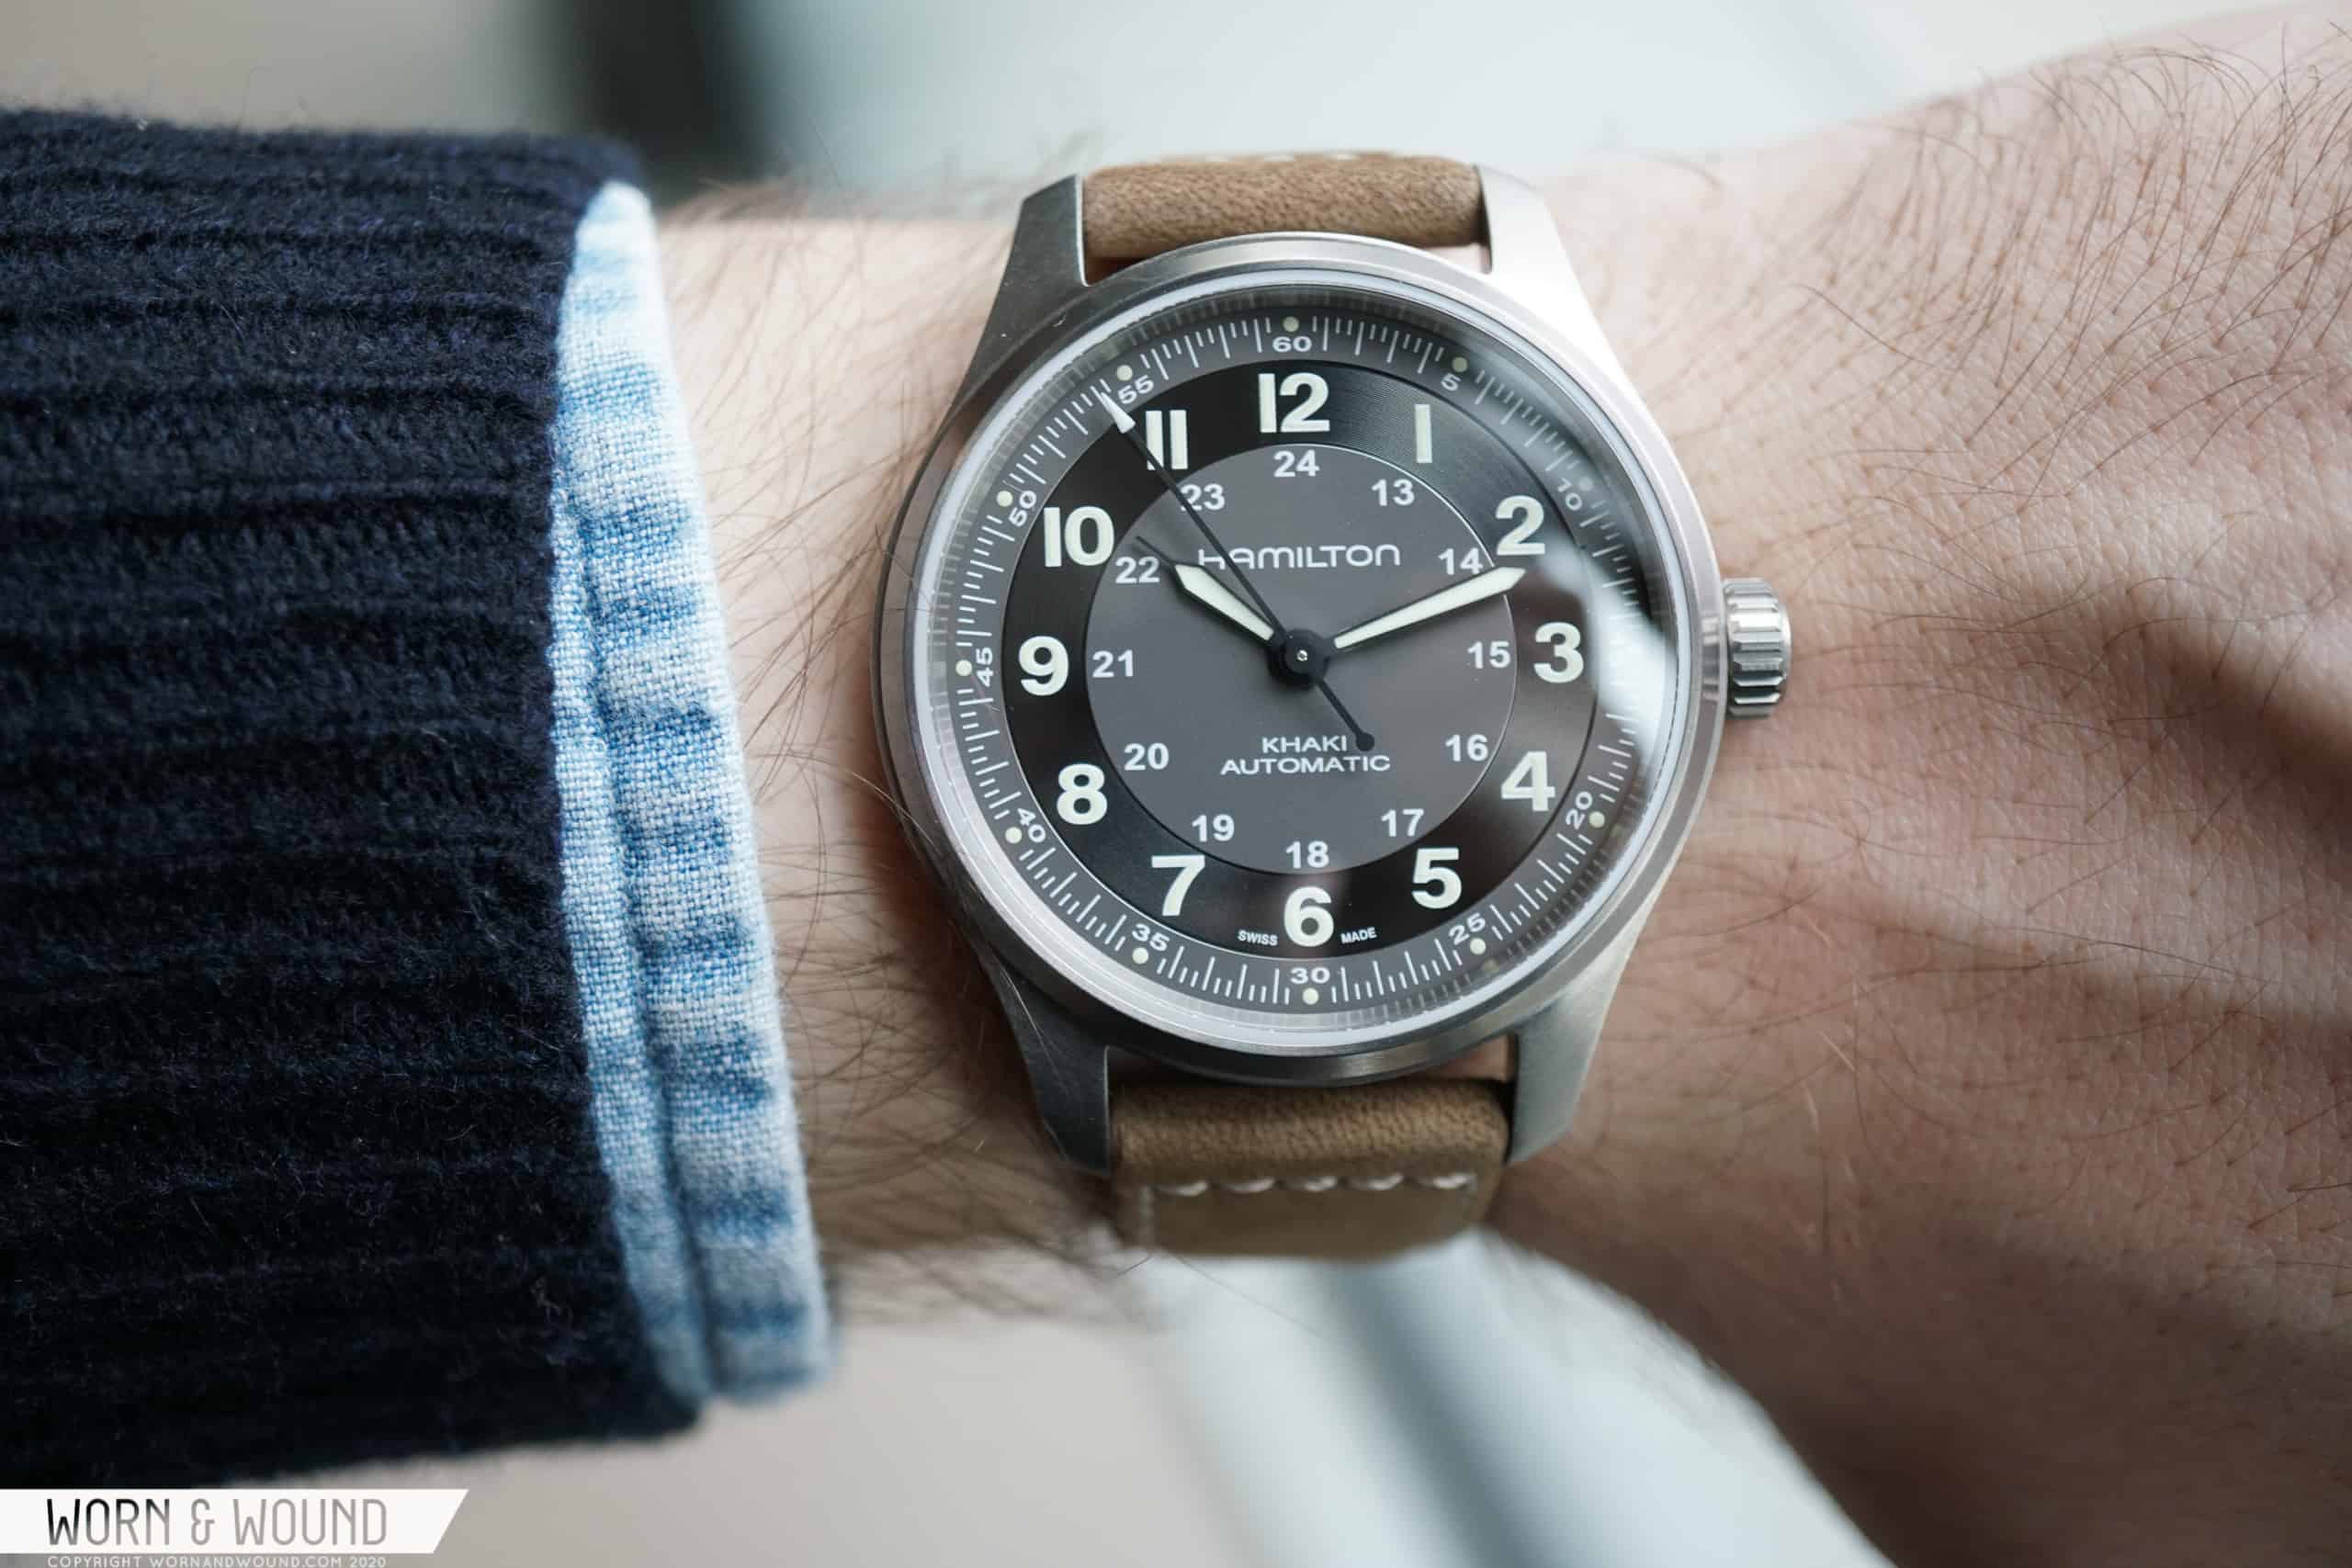 Hamilton's Latest Field Watch Mixes Old and New in Titanium - Worn & Wound